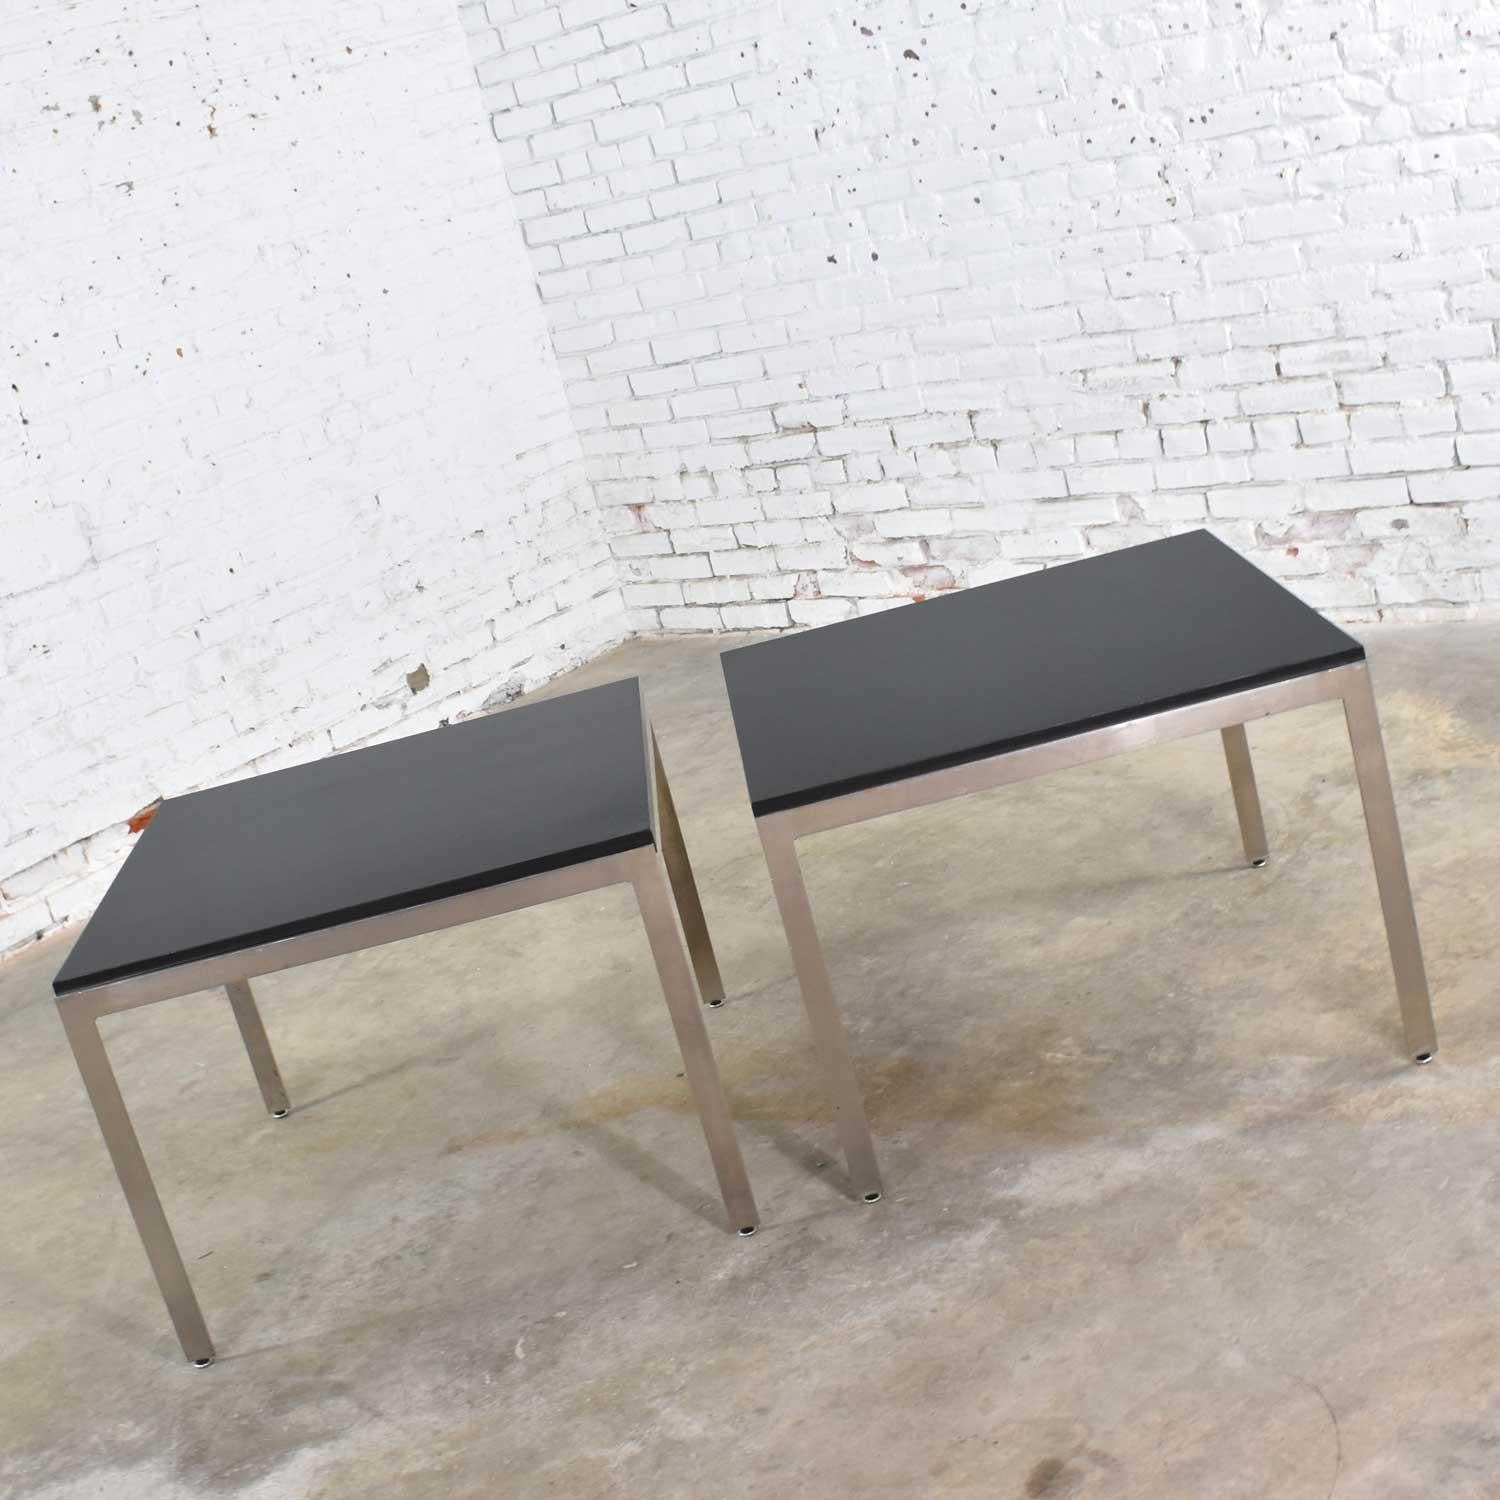 Vintage Large Modern Square End Tables in Stainless Steel Black Laminate Tops 3